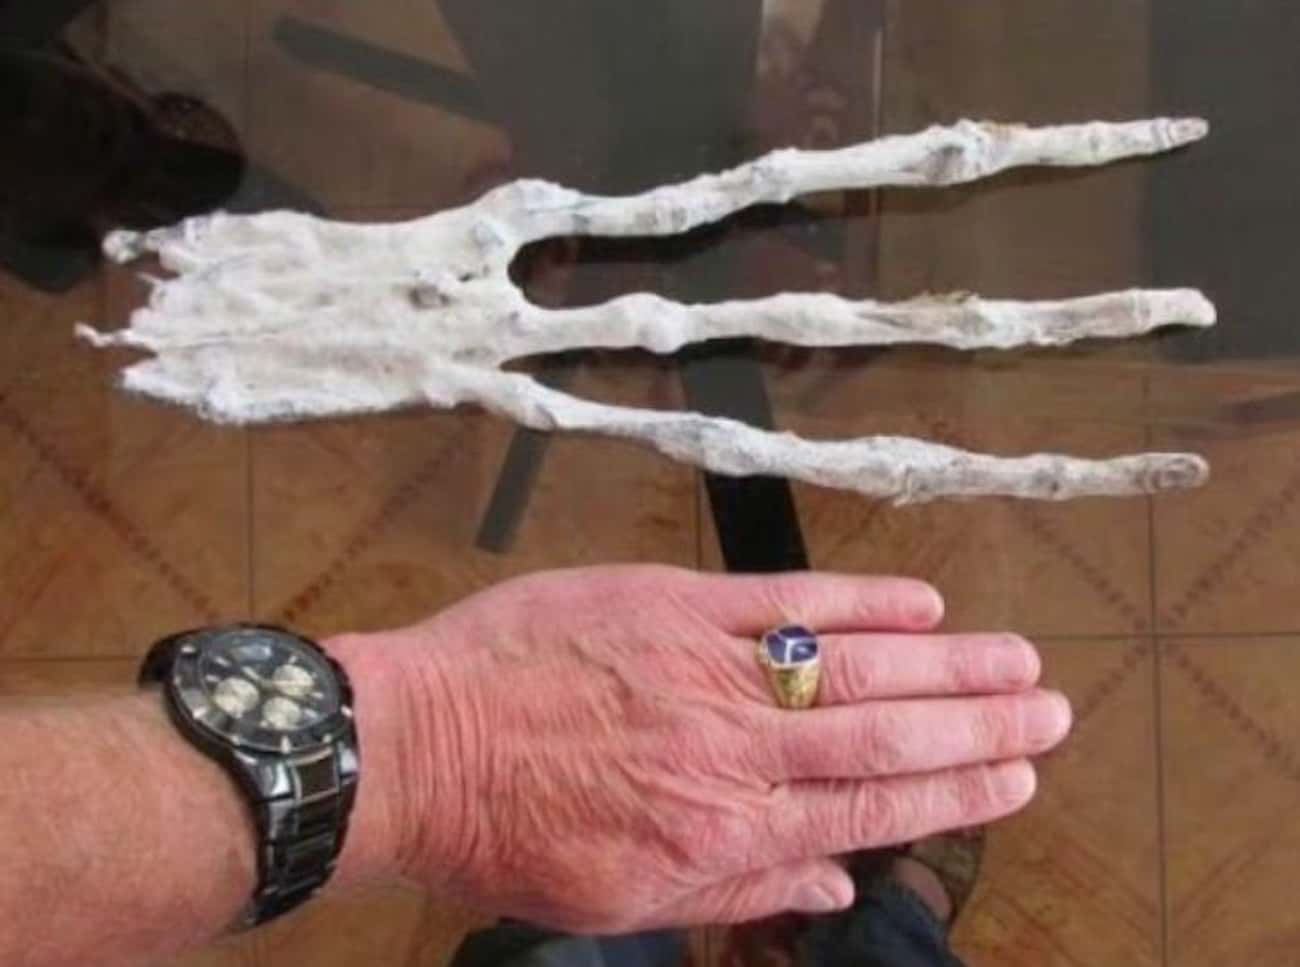 The Hand Has 8-Inch Long Fingers With Fingernails